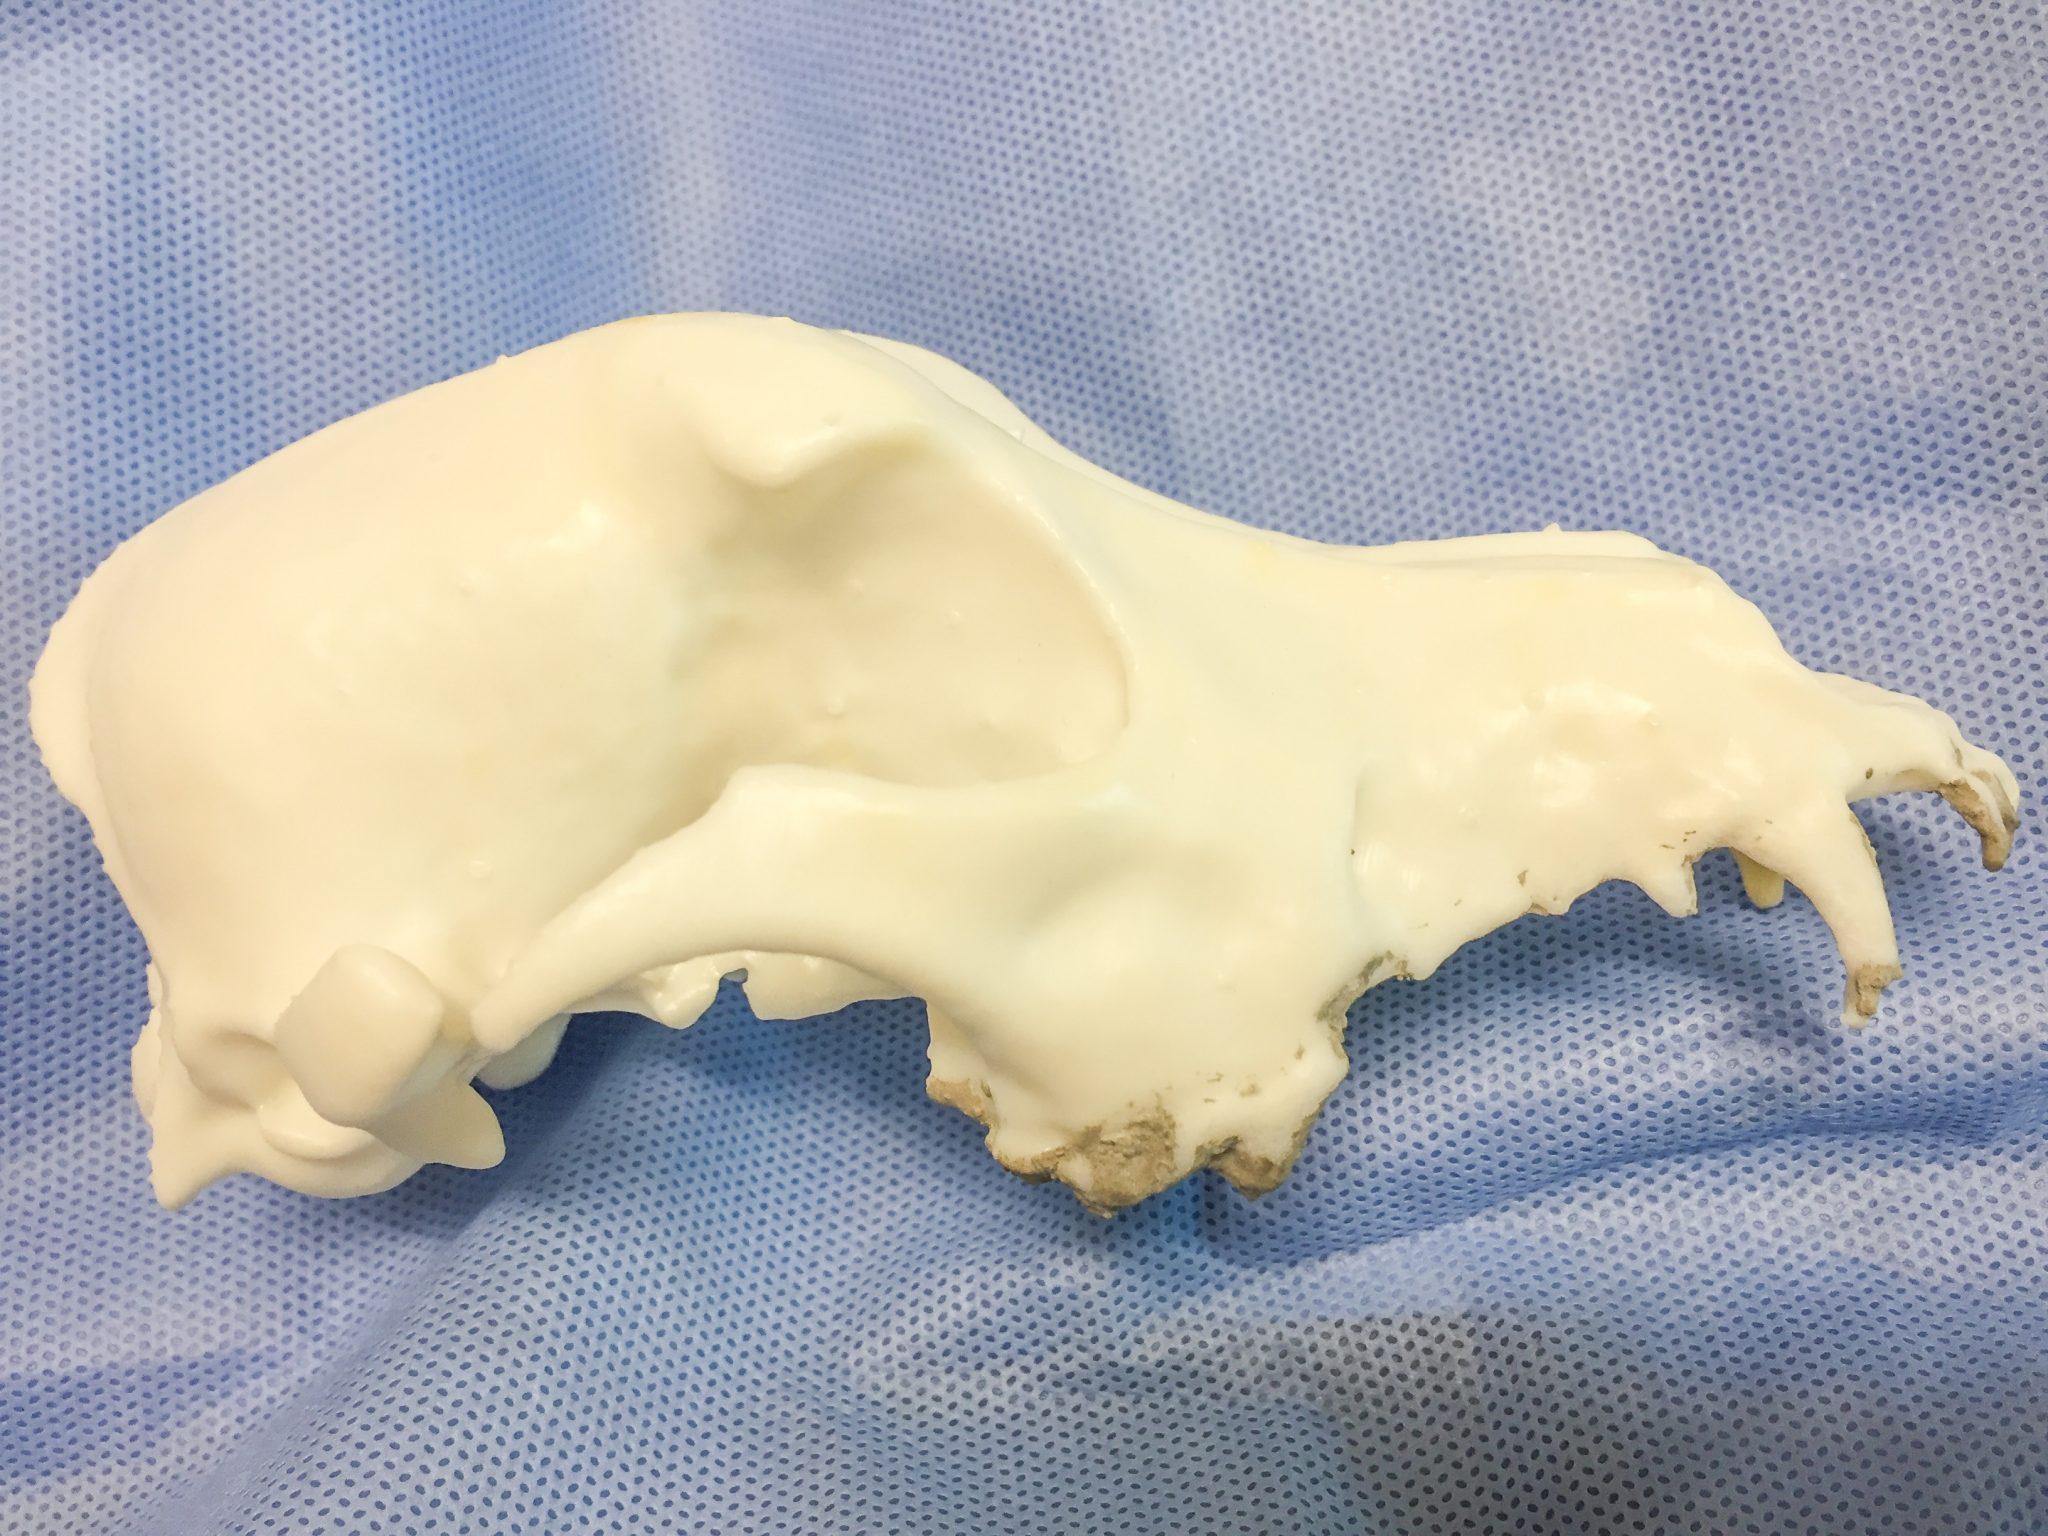 A 3D printed dog skull is being used by LMU-CVM students to practice dental cleaning. Image via Lincoln Memorial University